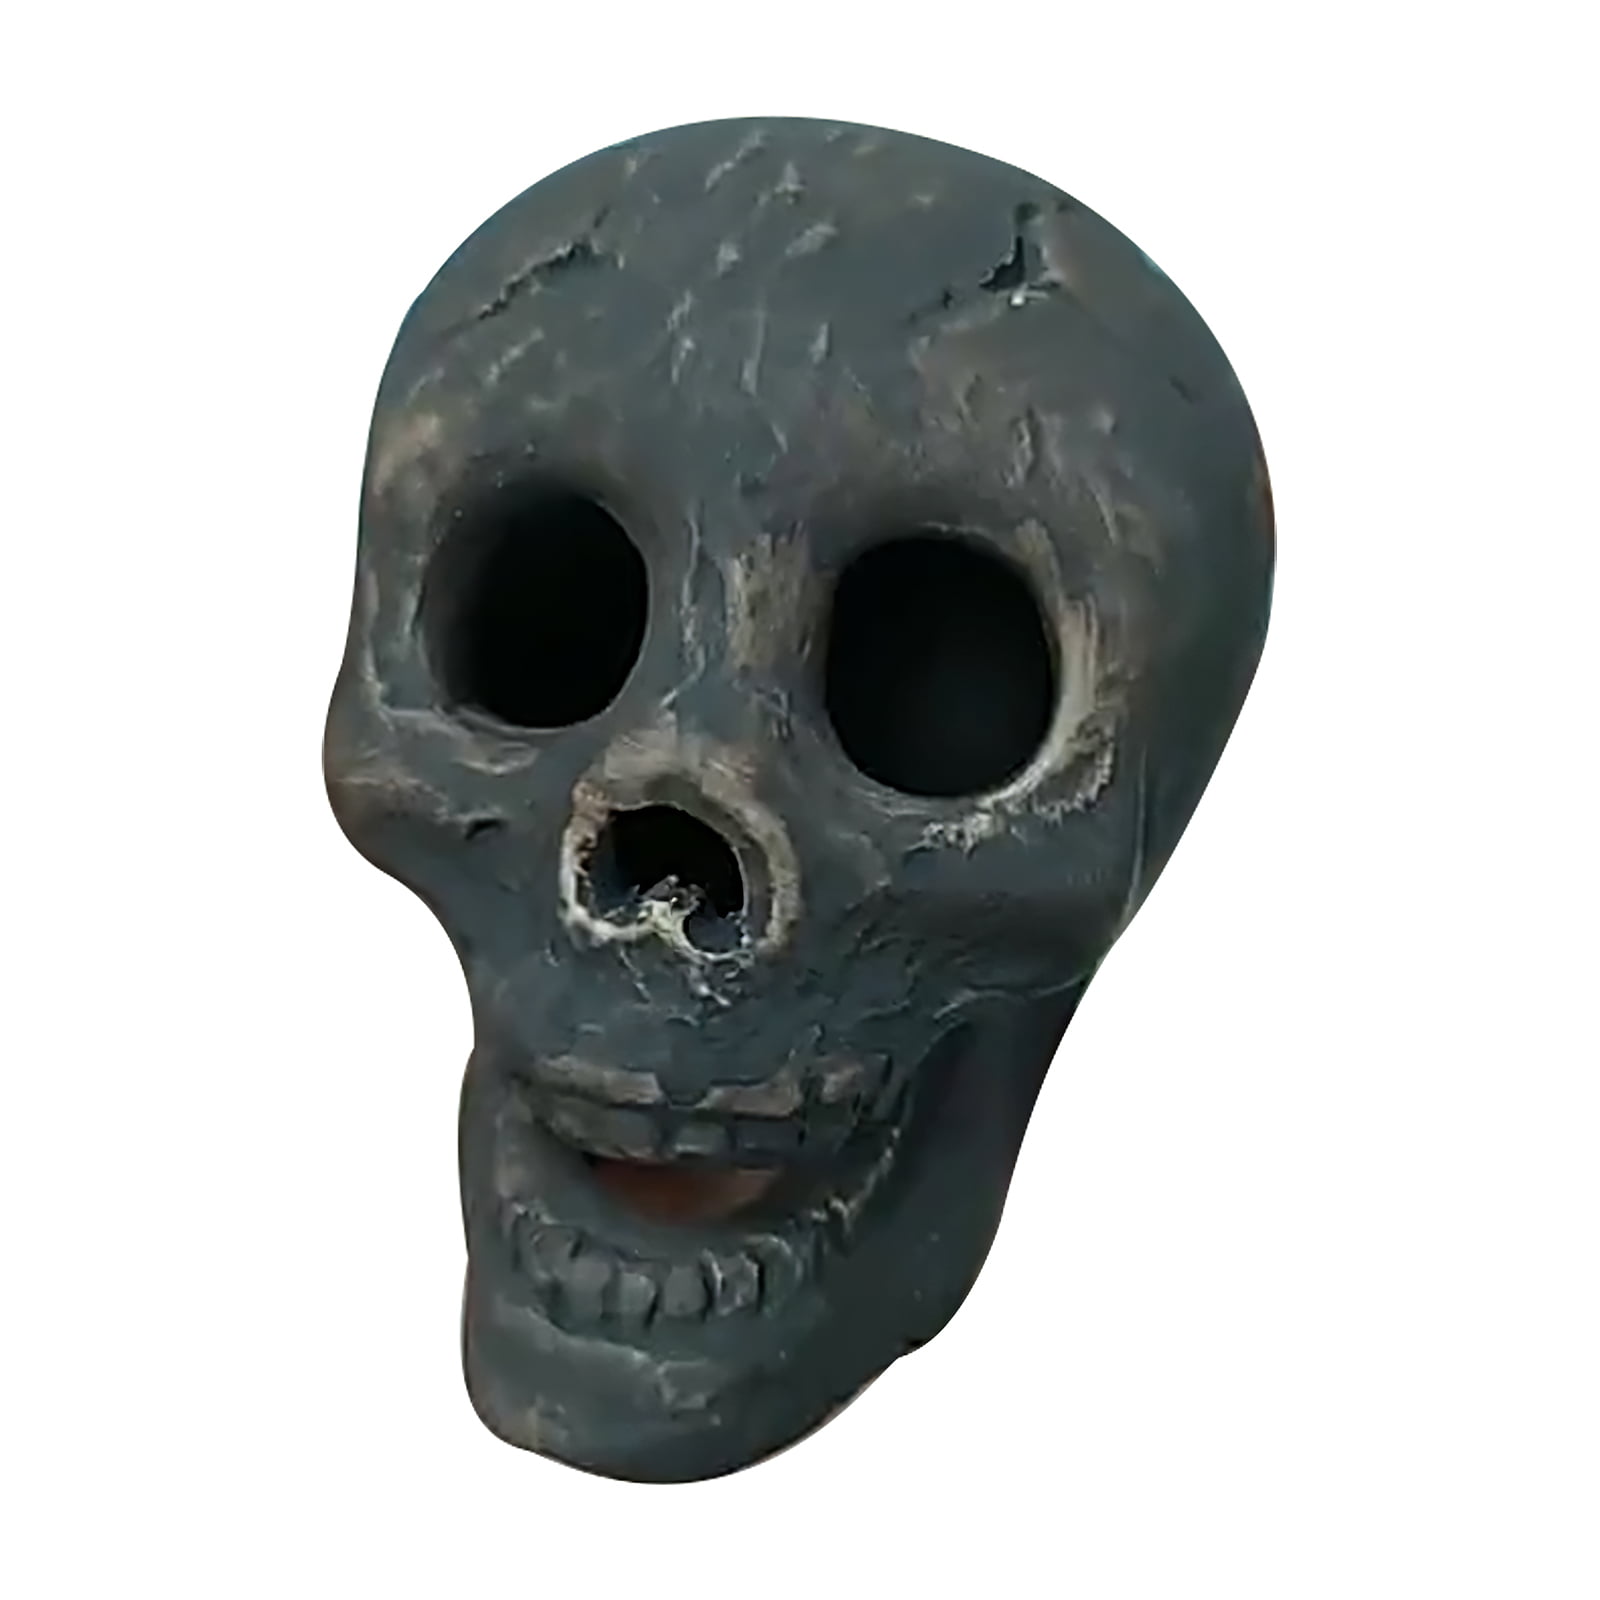 BURNT FACE HANGING HEAD SCARY HALLOWEEN PROP ACCESSORY FOR FANCY DRESS PARTY 